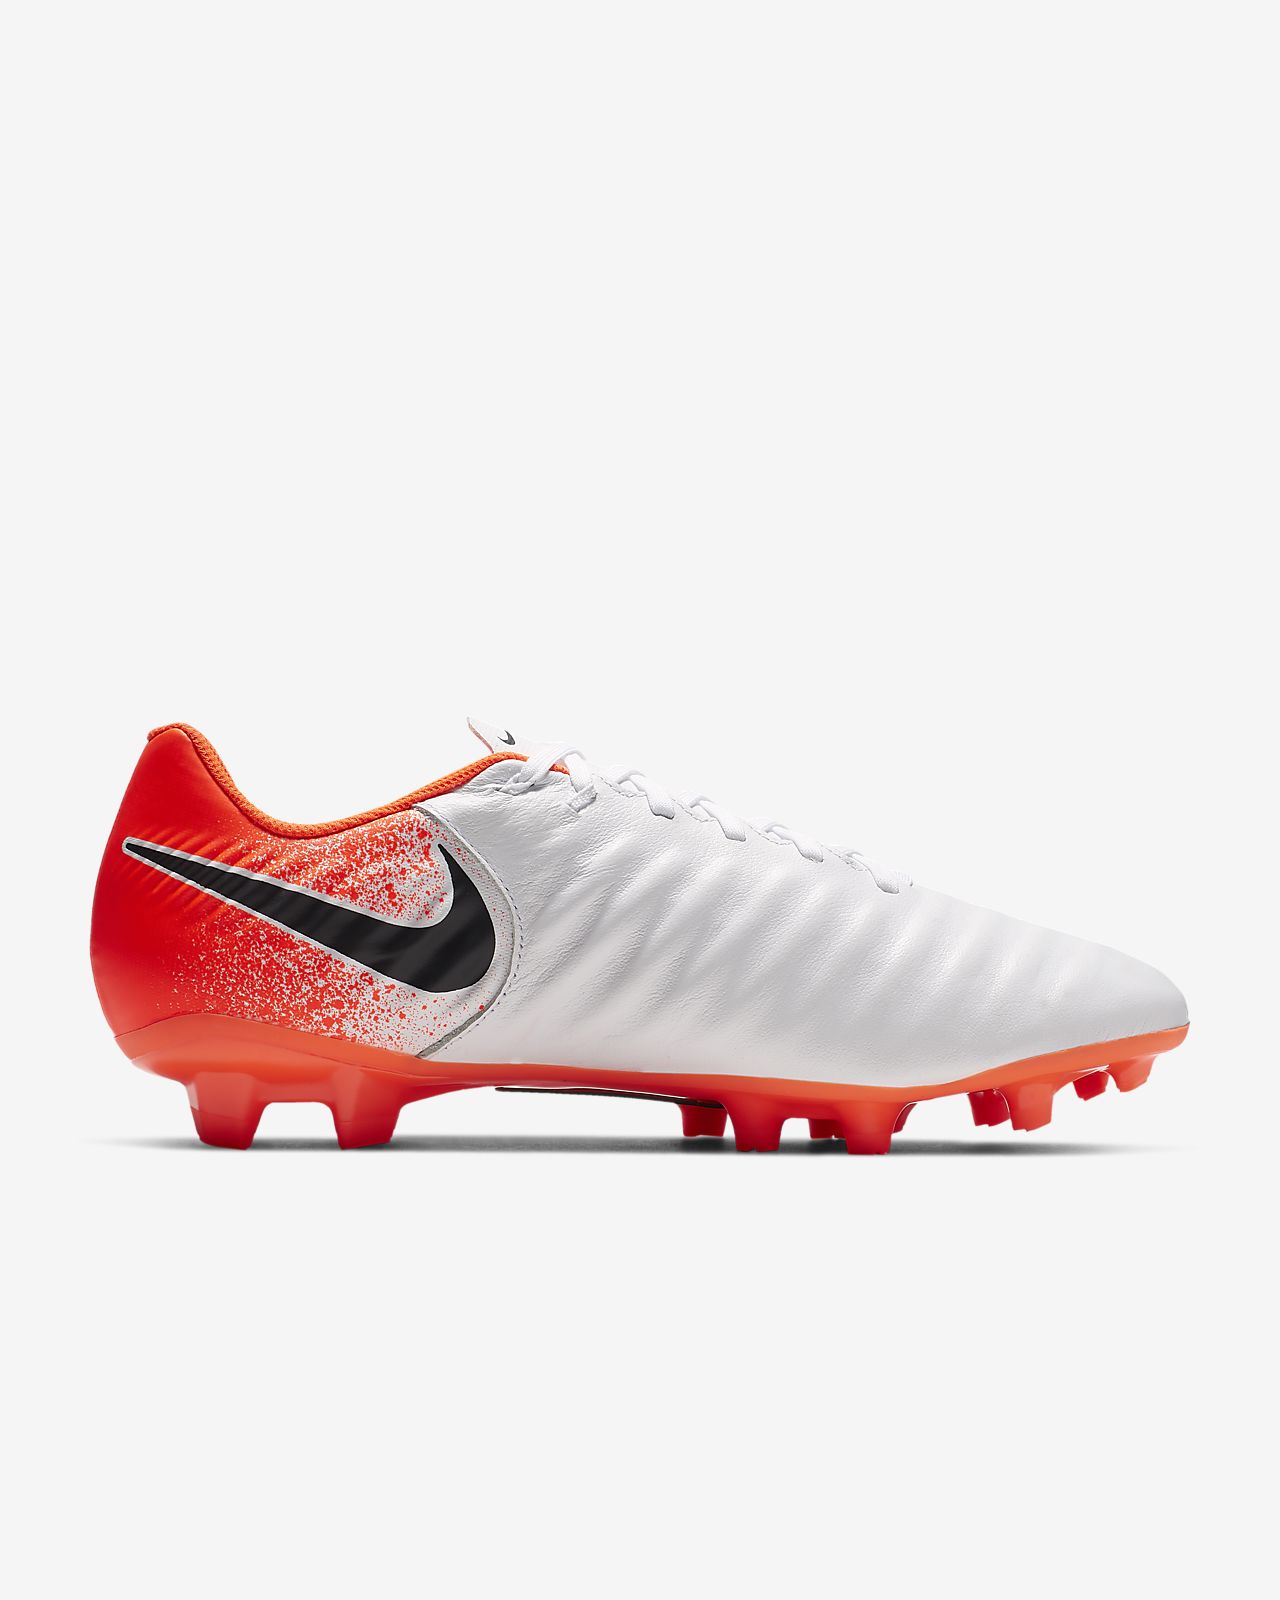 Nike Weather Legend 8 Pro Fg At6133 004 Price ‹ie.